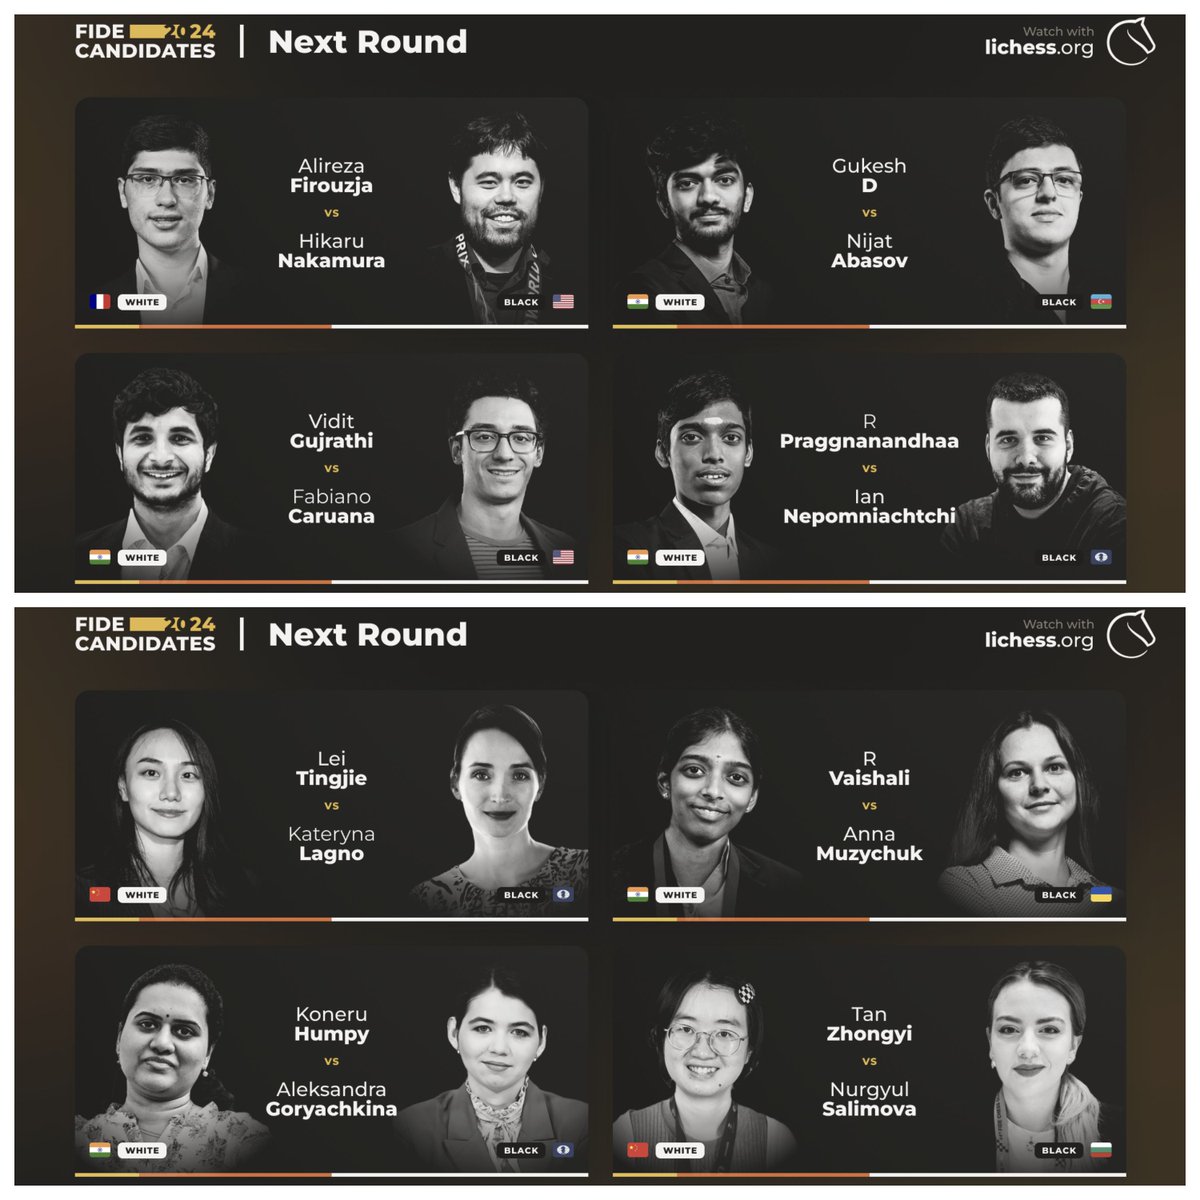 Join us in 1h on YouTube youtube.com/watch?v=xhOXRe… & Twitch twitch.tv/lichessdotorg for our live stream coverage with @irene_sukandar and @LauraUnuk of Round 5 of the 2024 Candidates lichess.org/broadcast/fide… & Women's Candidates lichess.org/broadcast/fide…!